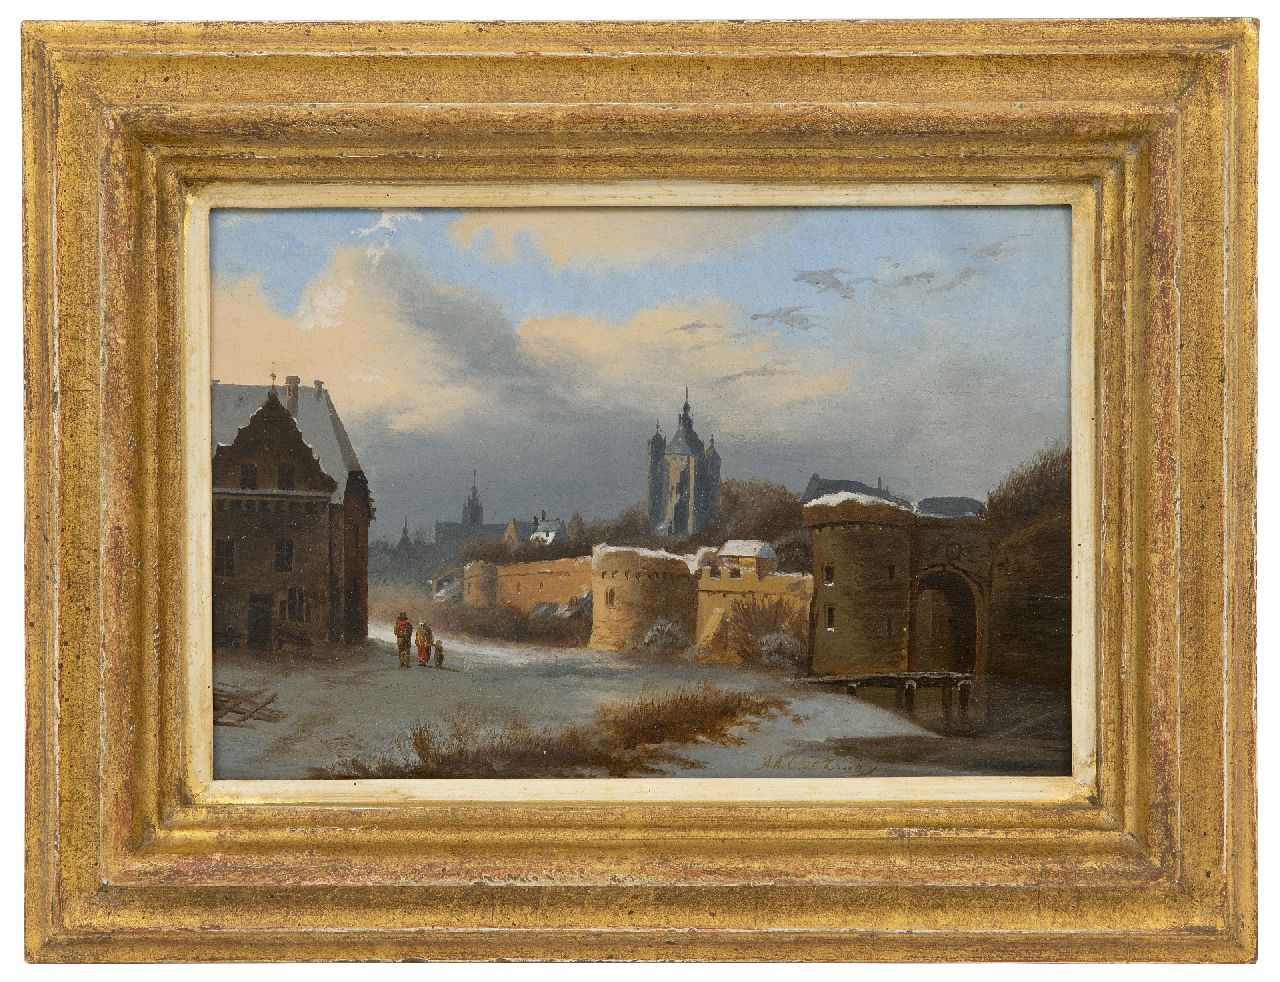 Zant A.A.C. van 't | Arnoldus Antonius Christianus van 't Zant | Paintings offered for sale | View of a fortified town, oil on panel 16.7 x 24.8 cm, signed l.r.